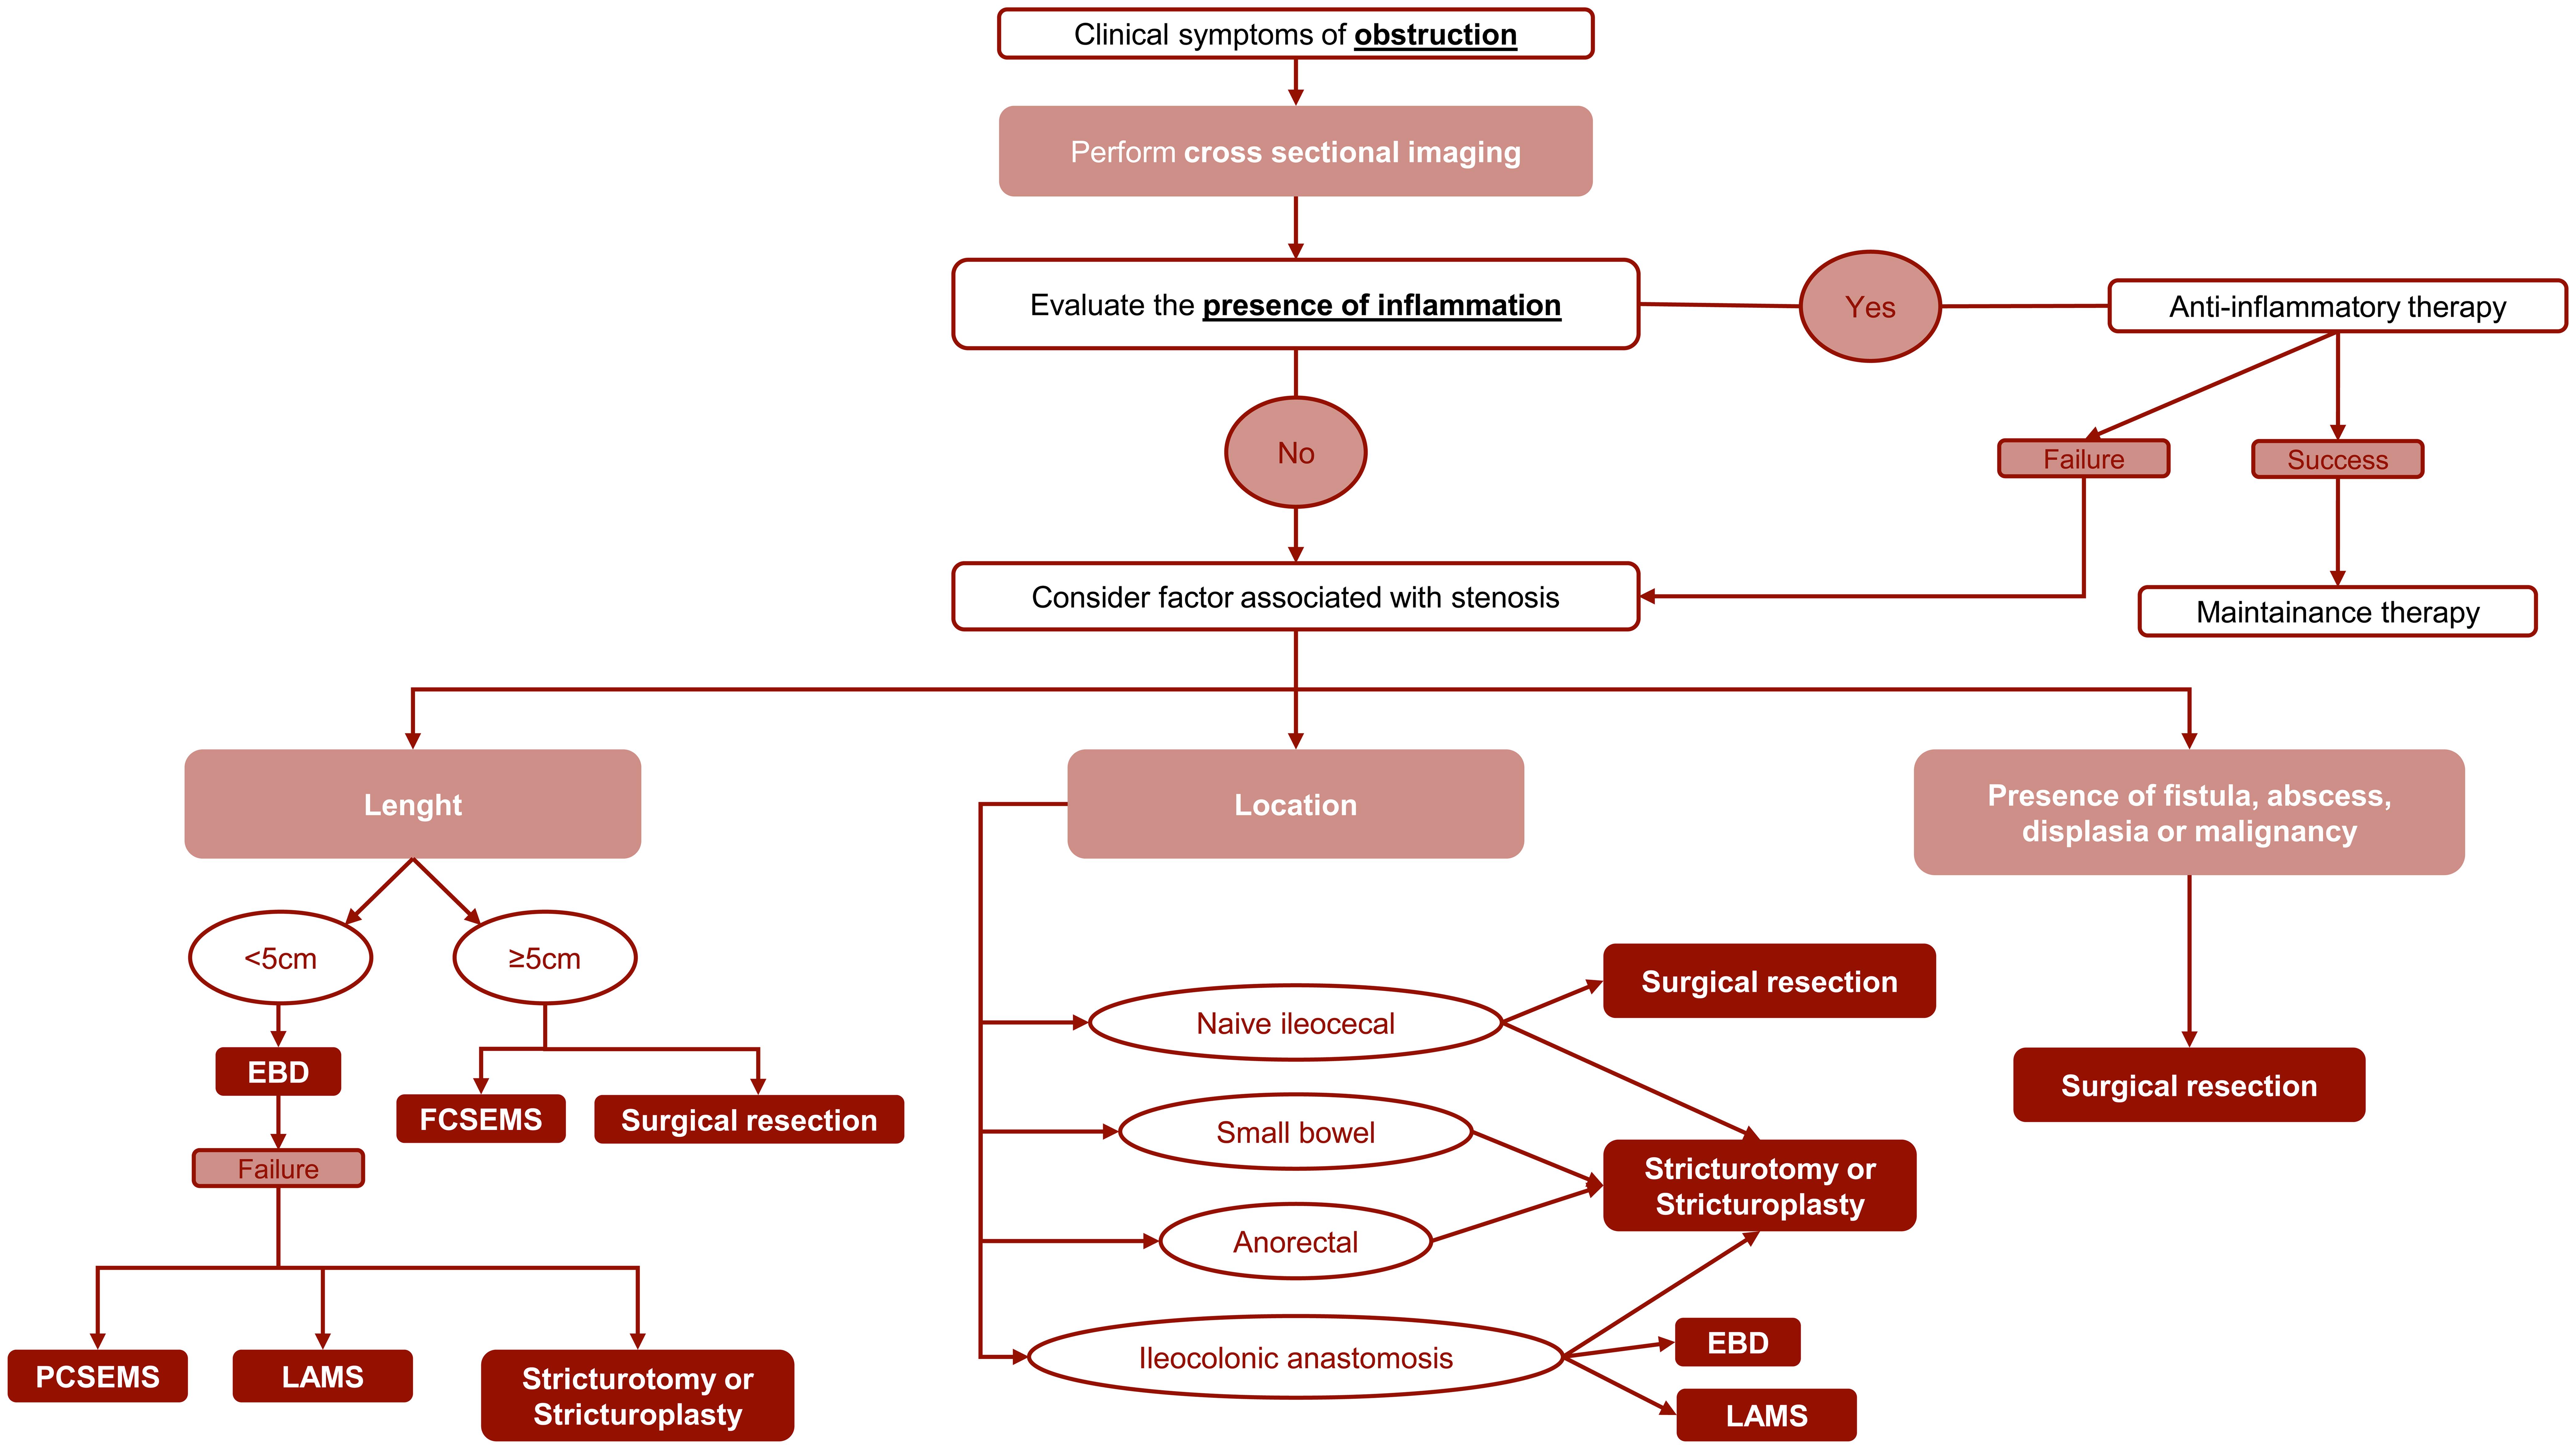 Flow chart on diagnostic and interventional decision-making of IBD-related stenosis.